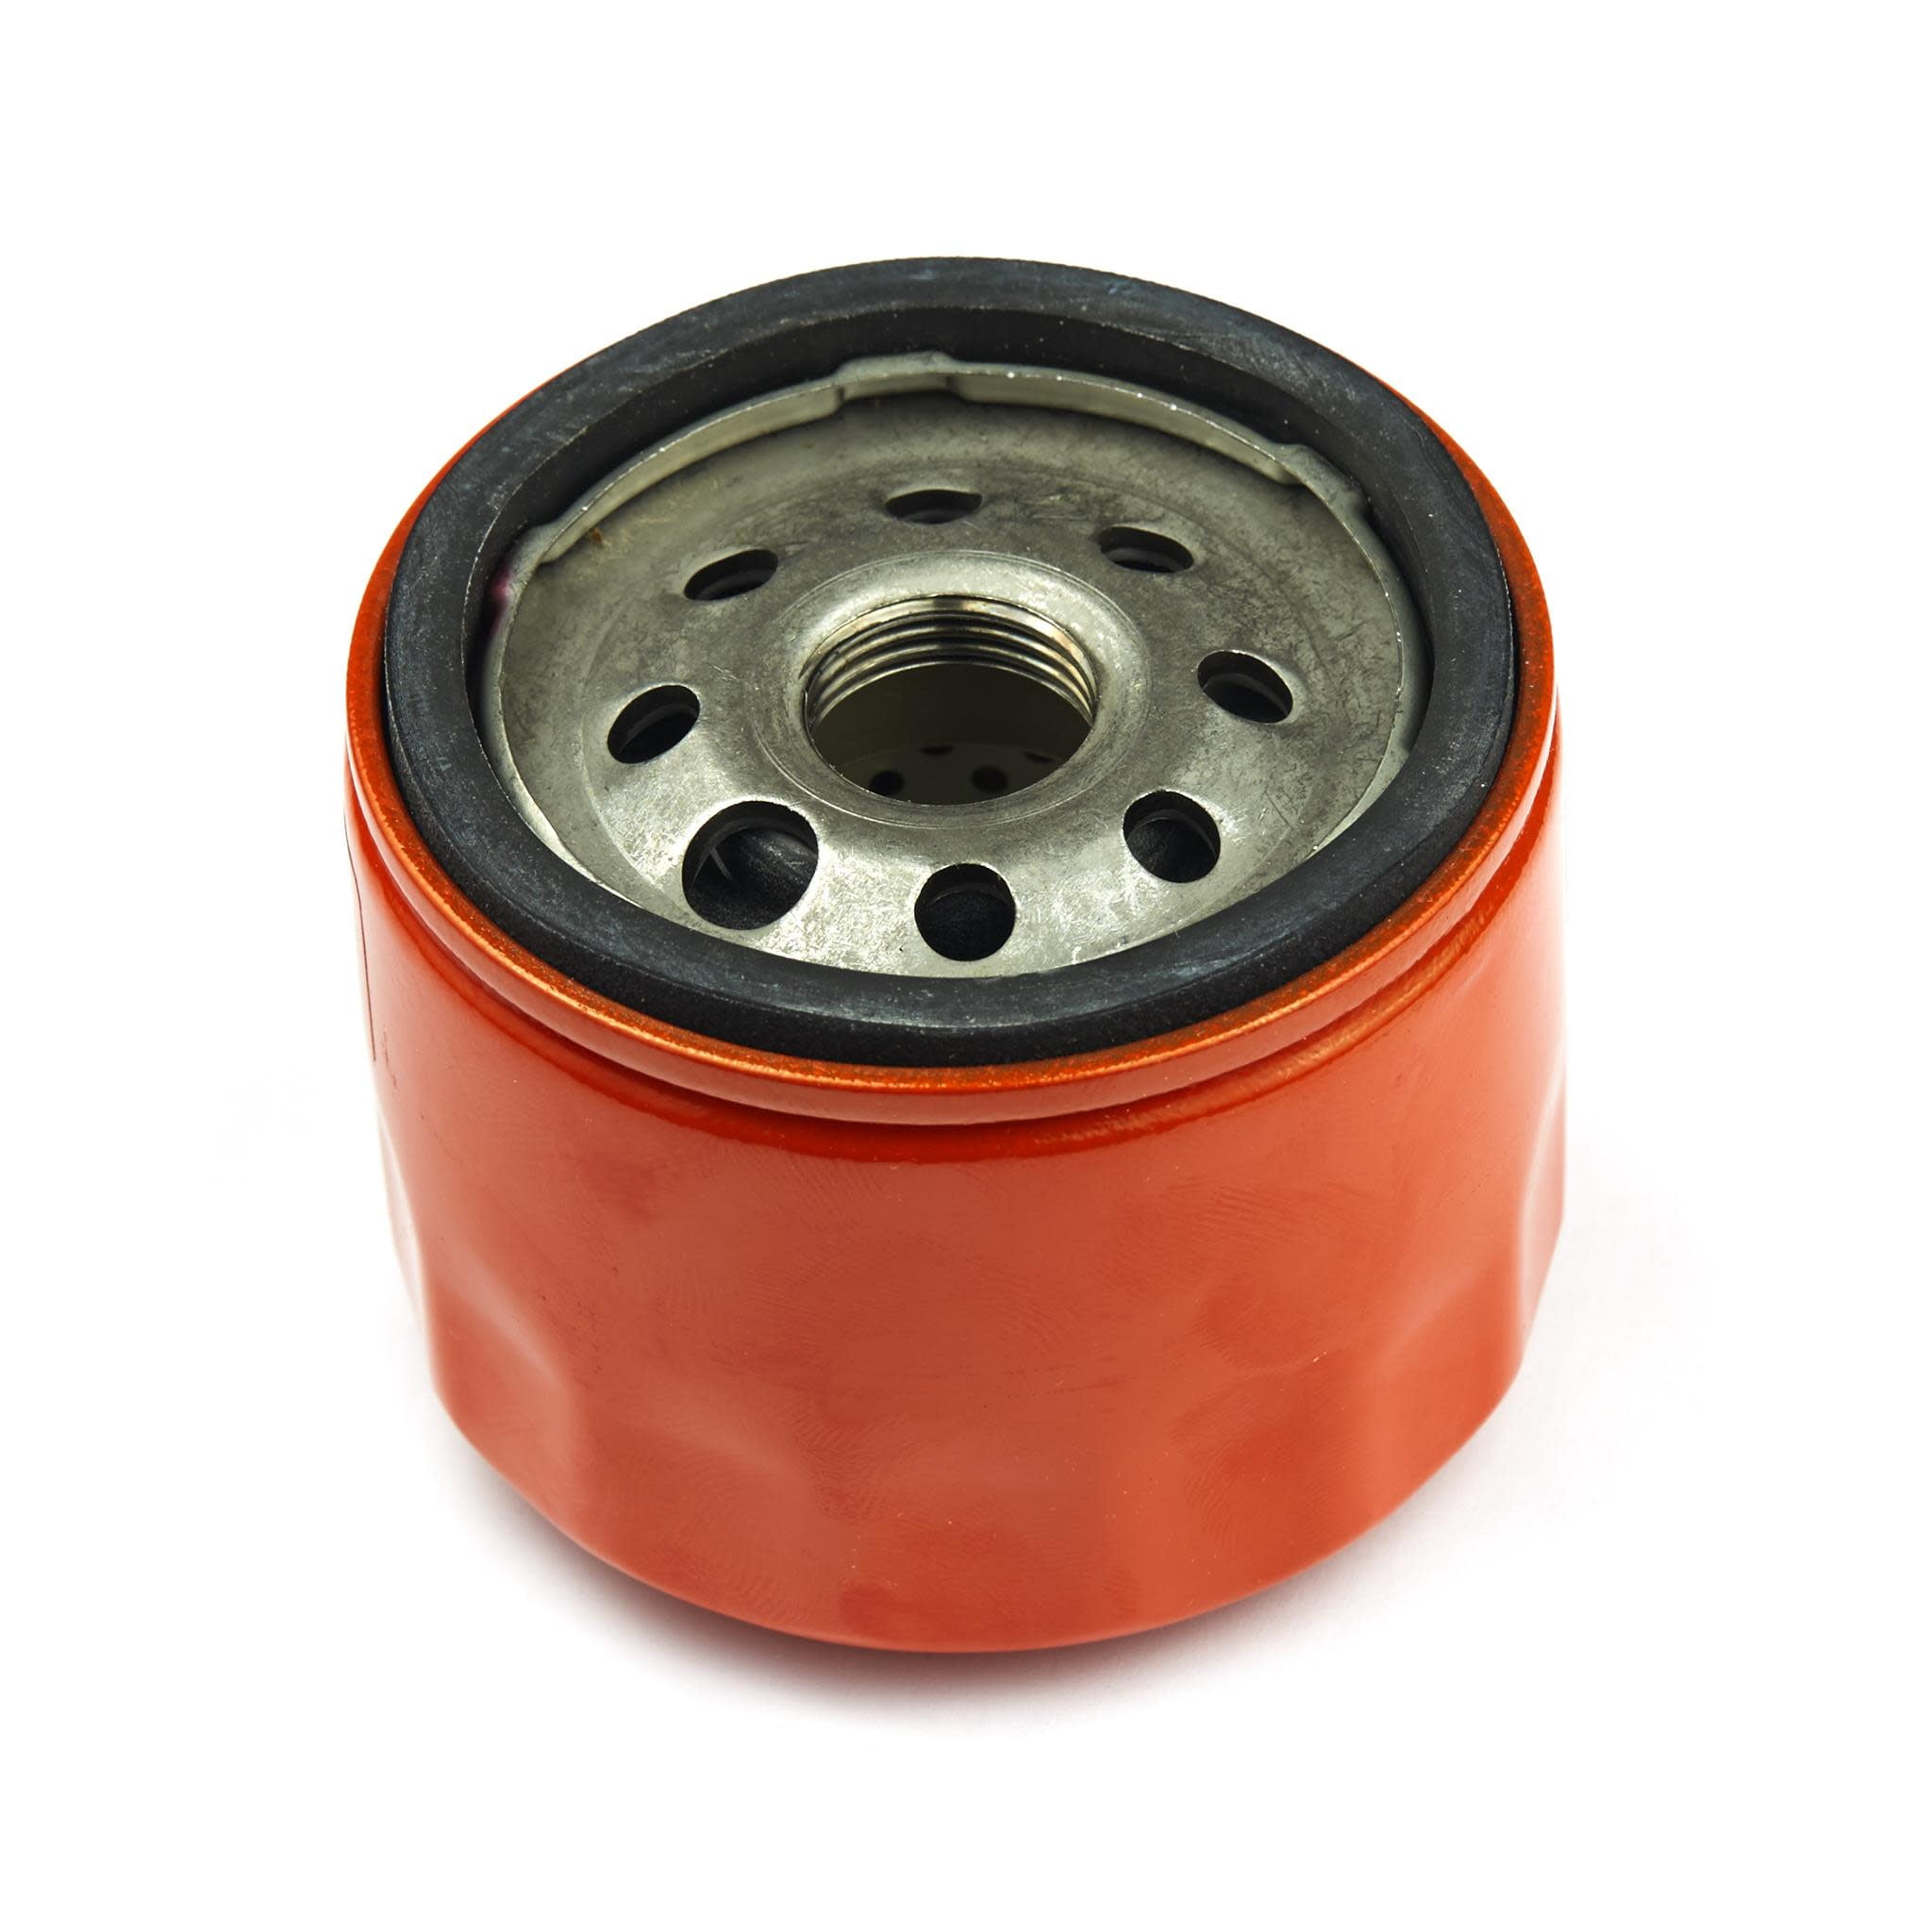 6 Oil Filter For Briggs & Stratton,and Kohler  Engines on many Makes and Models 